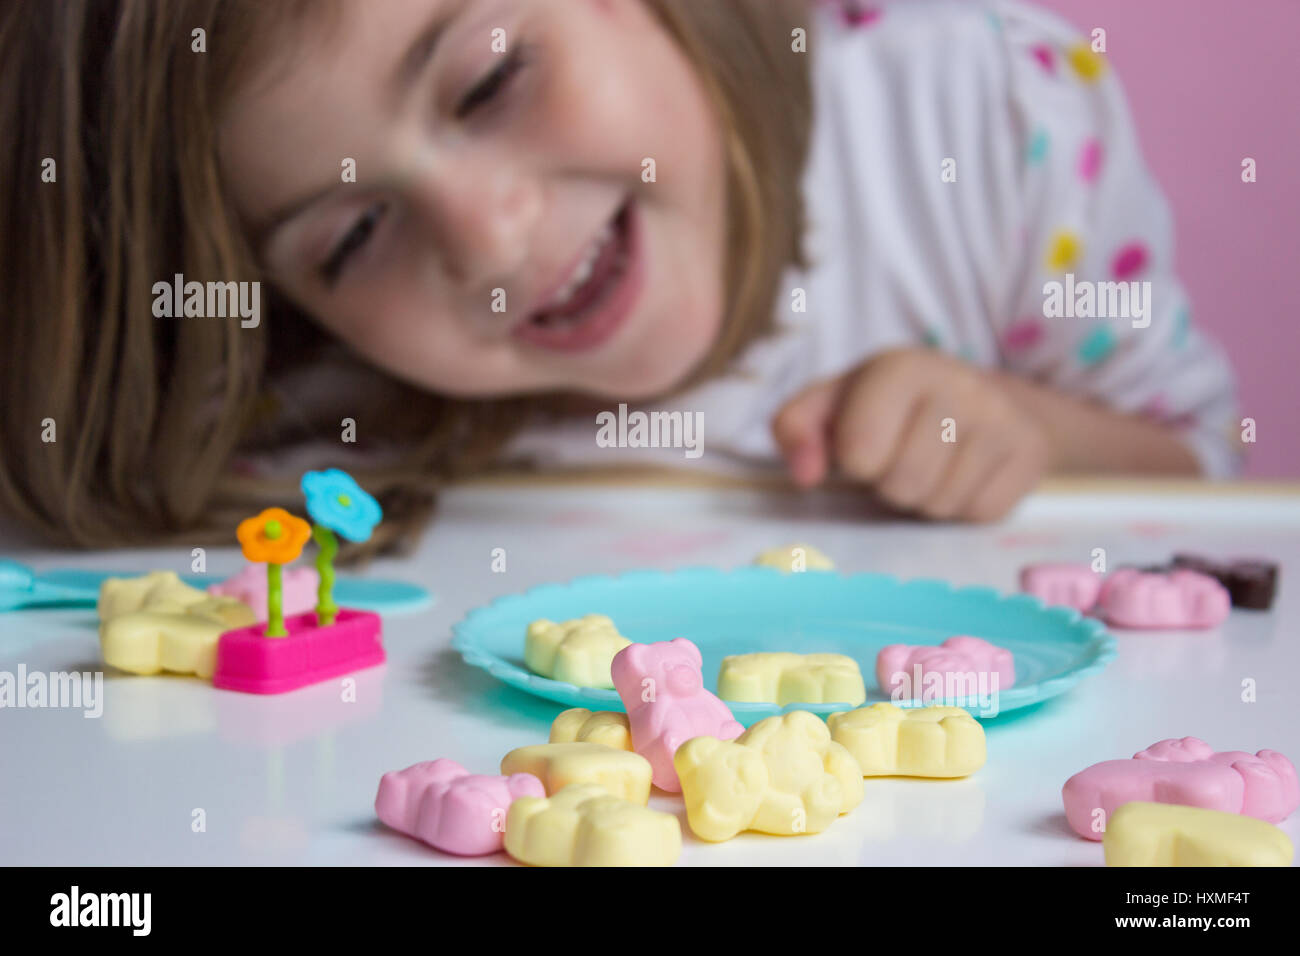 Little girl playing with candies; shallow depth of field Stock Photo